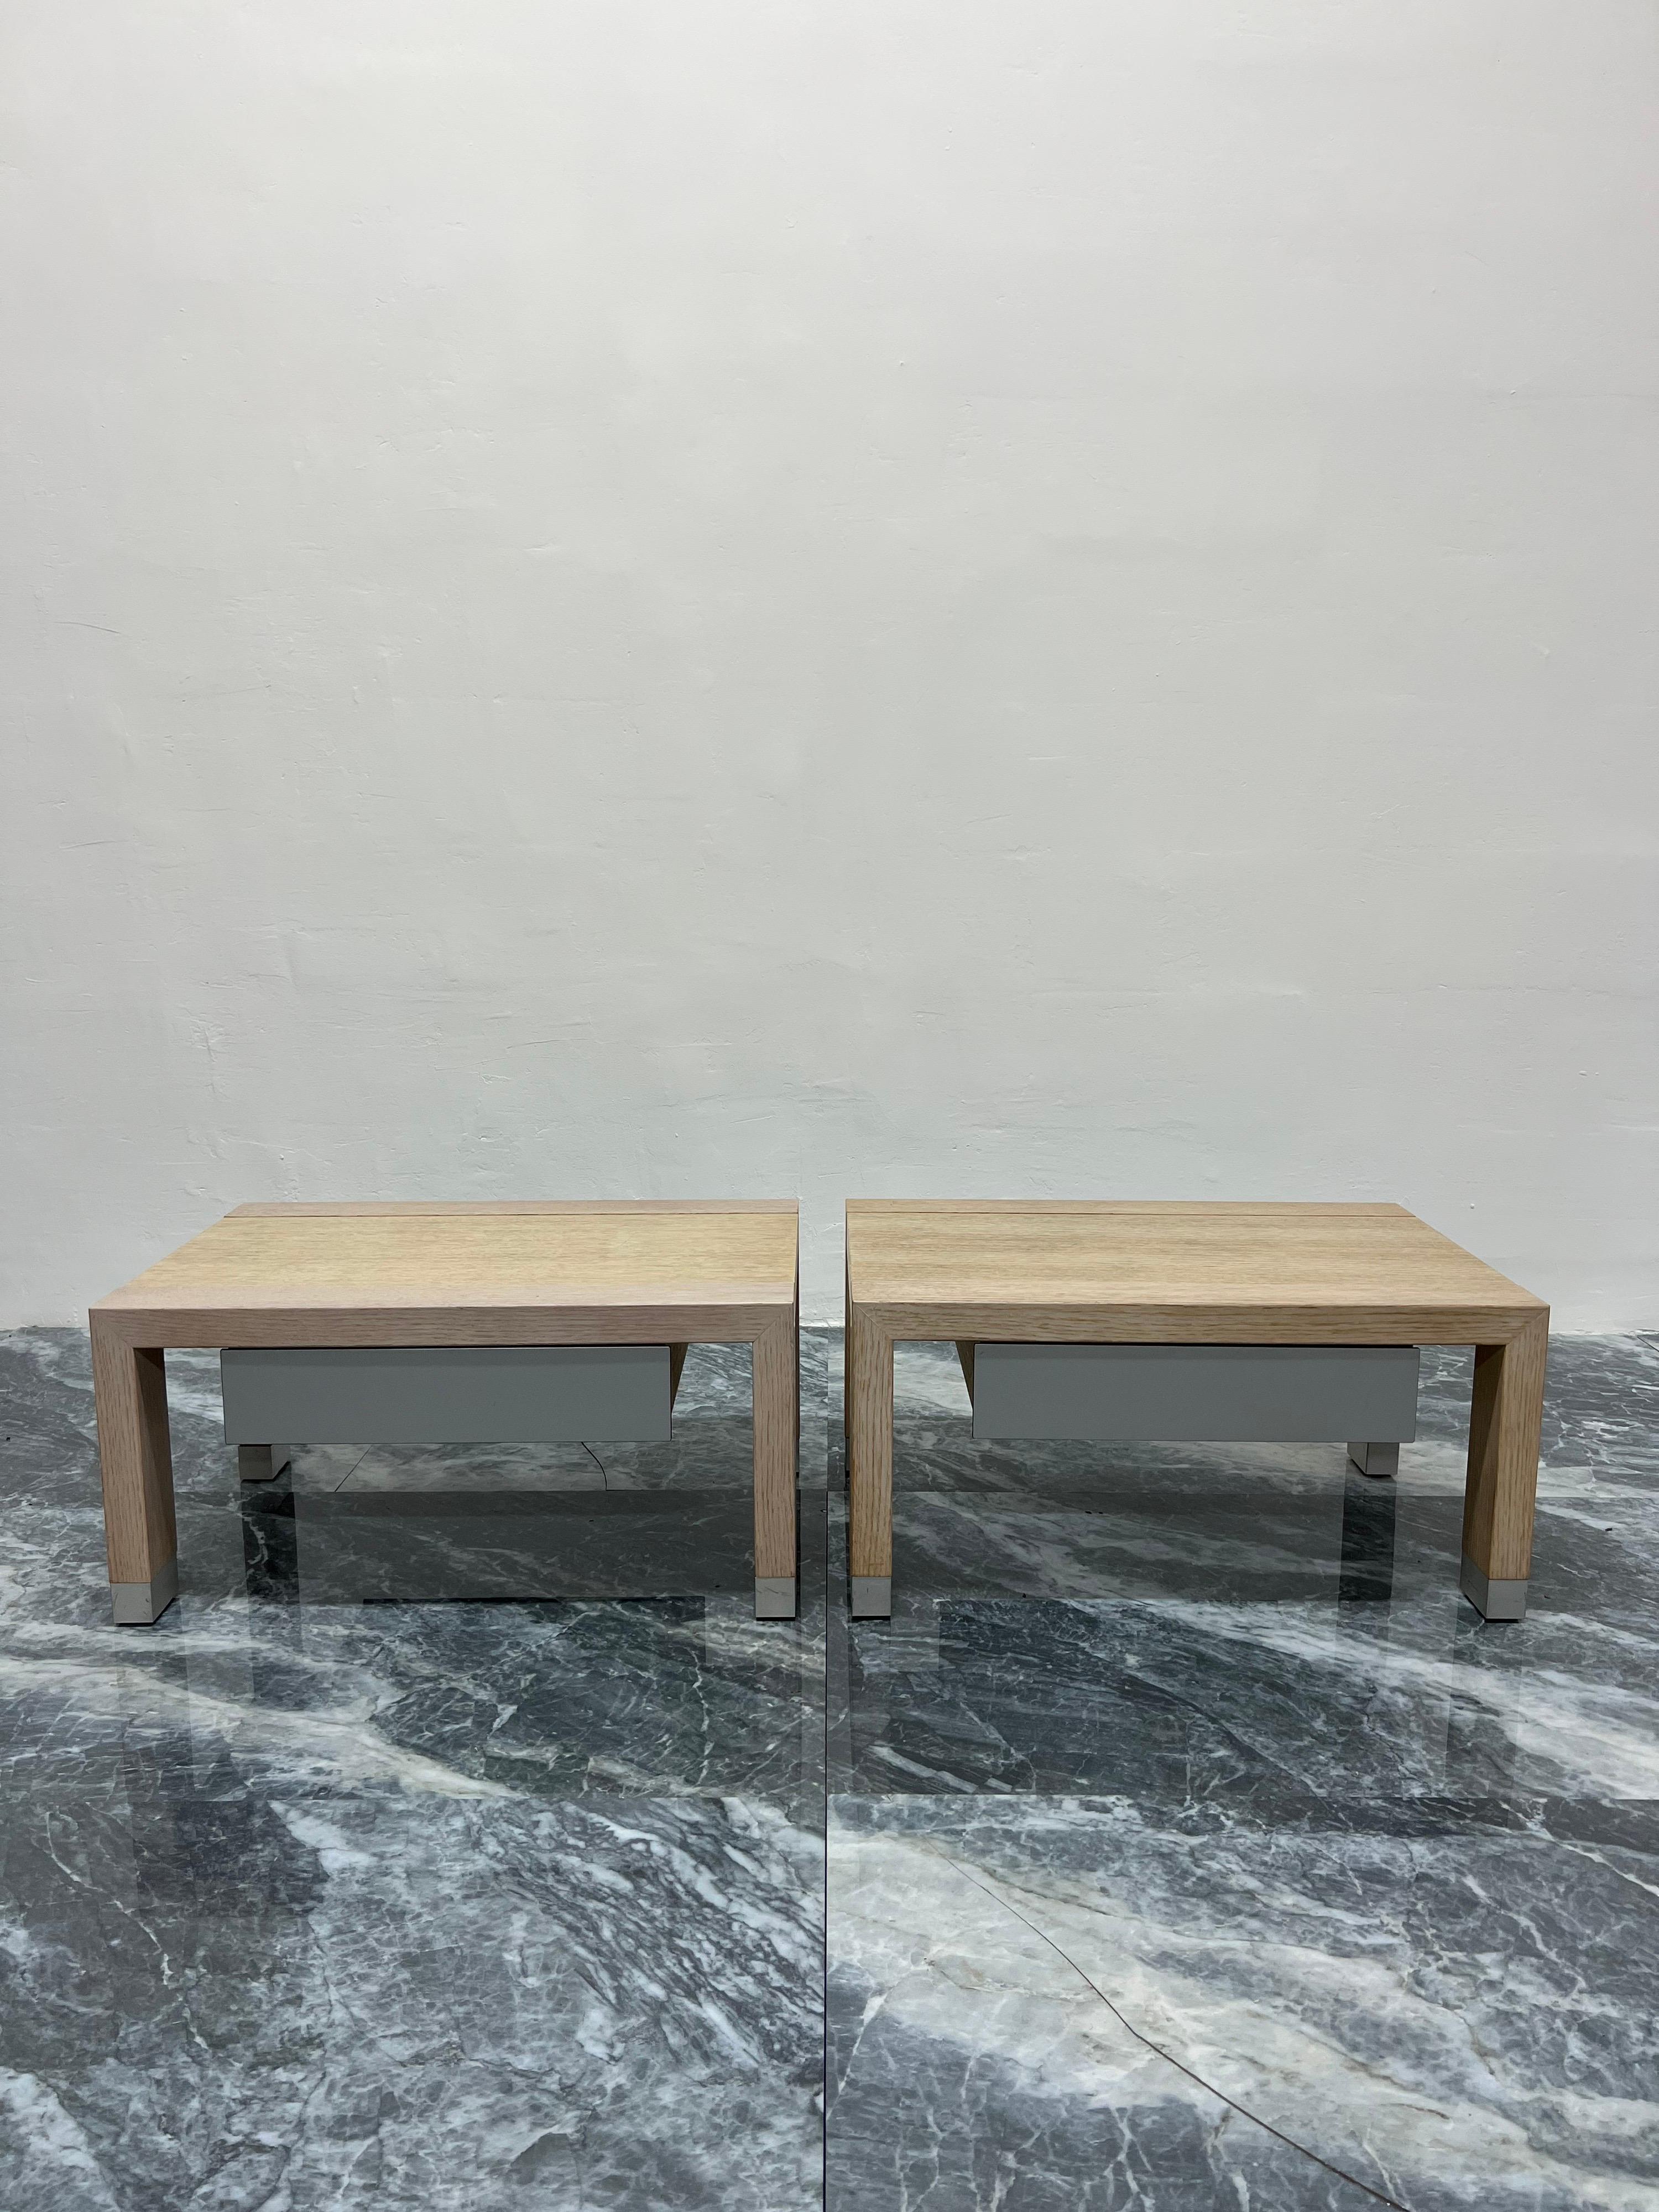 Pair of contemporary Lumeo low nightstands or bedside tables with drawers designed by Peter Maly for Ligne Roset. Constructed with a blonde oak hardwood frame and aluminum detailing.